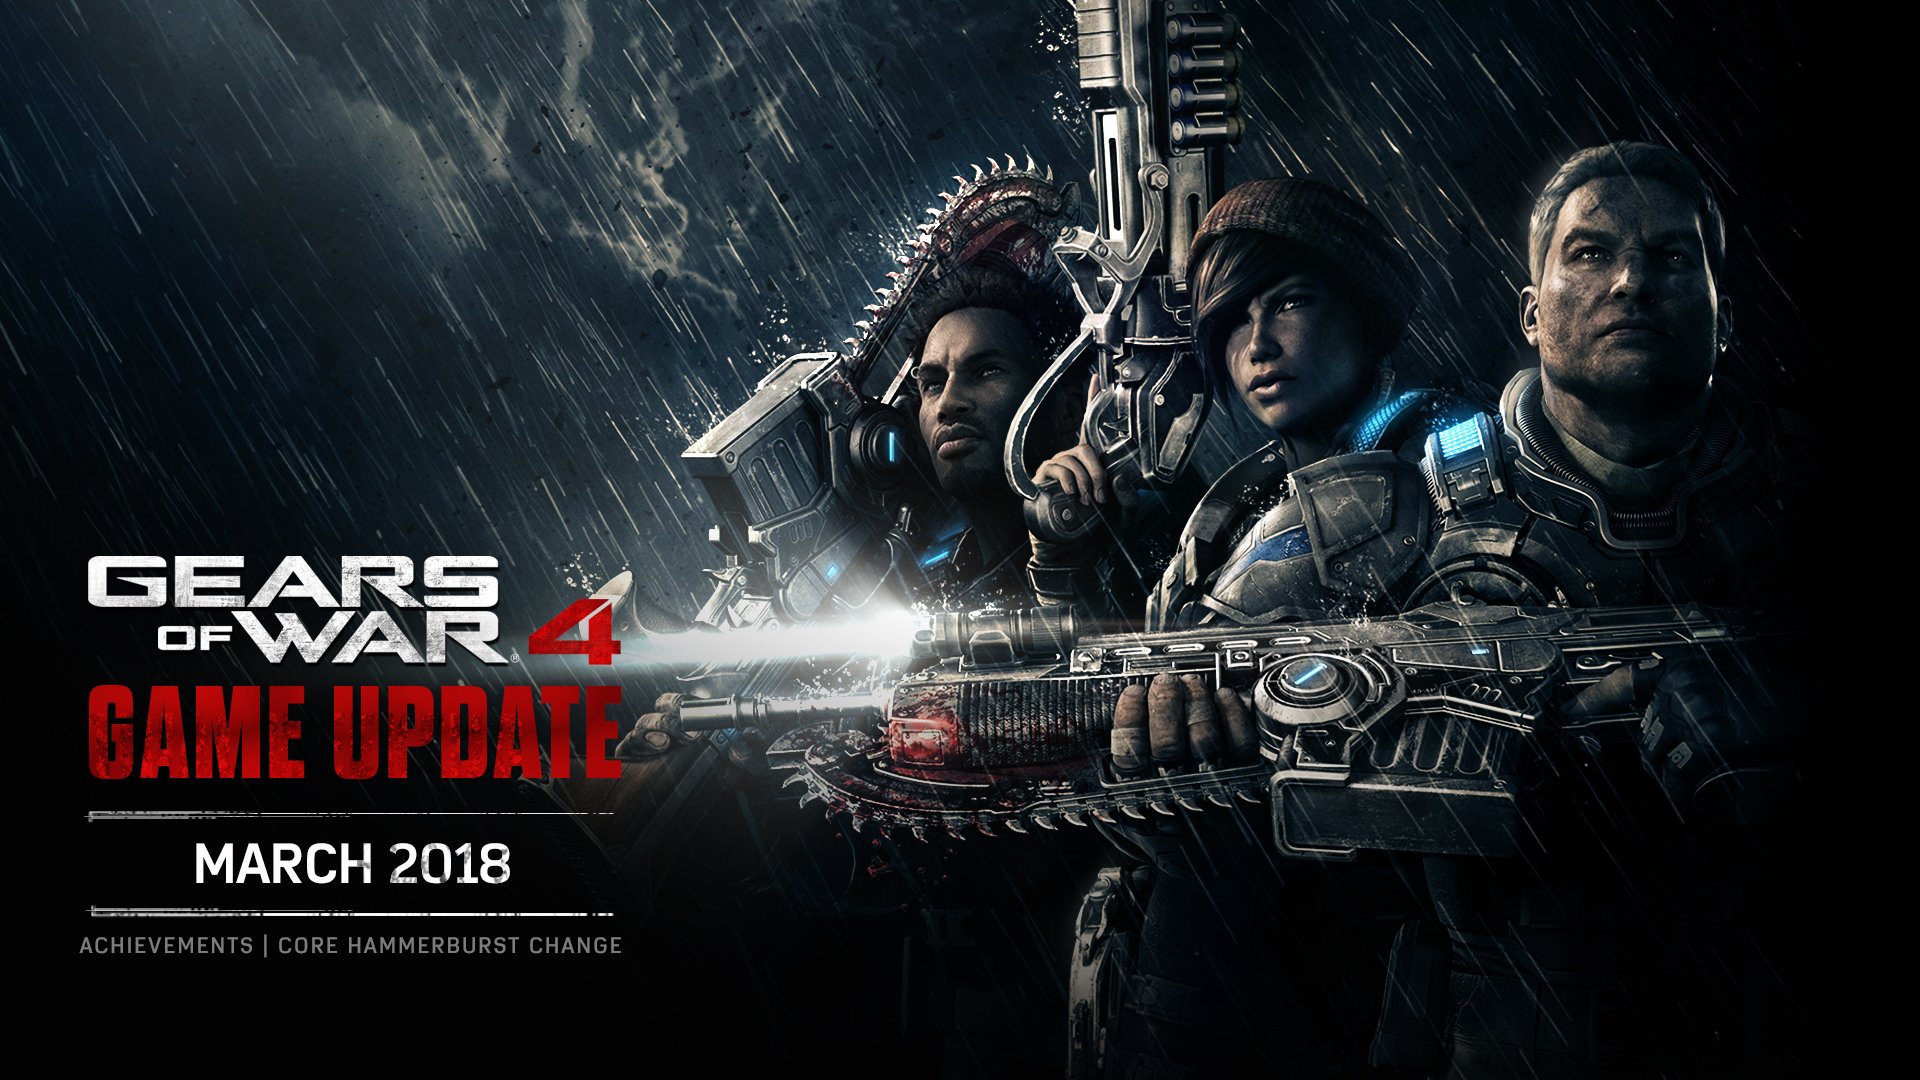 Gears of War 4 adds 11 new achievements in March update